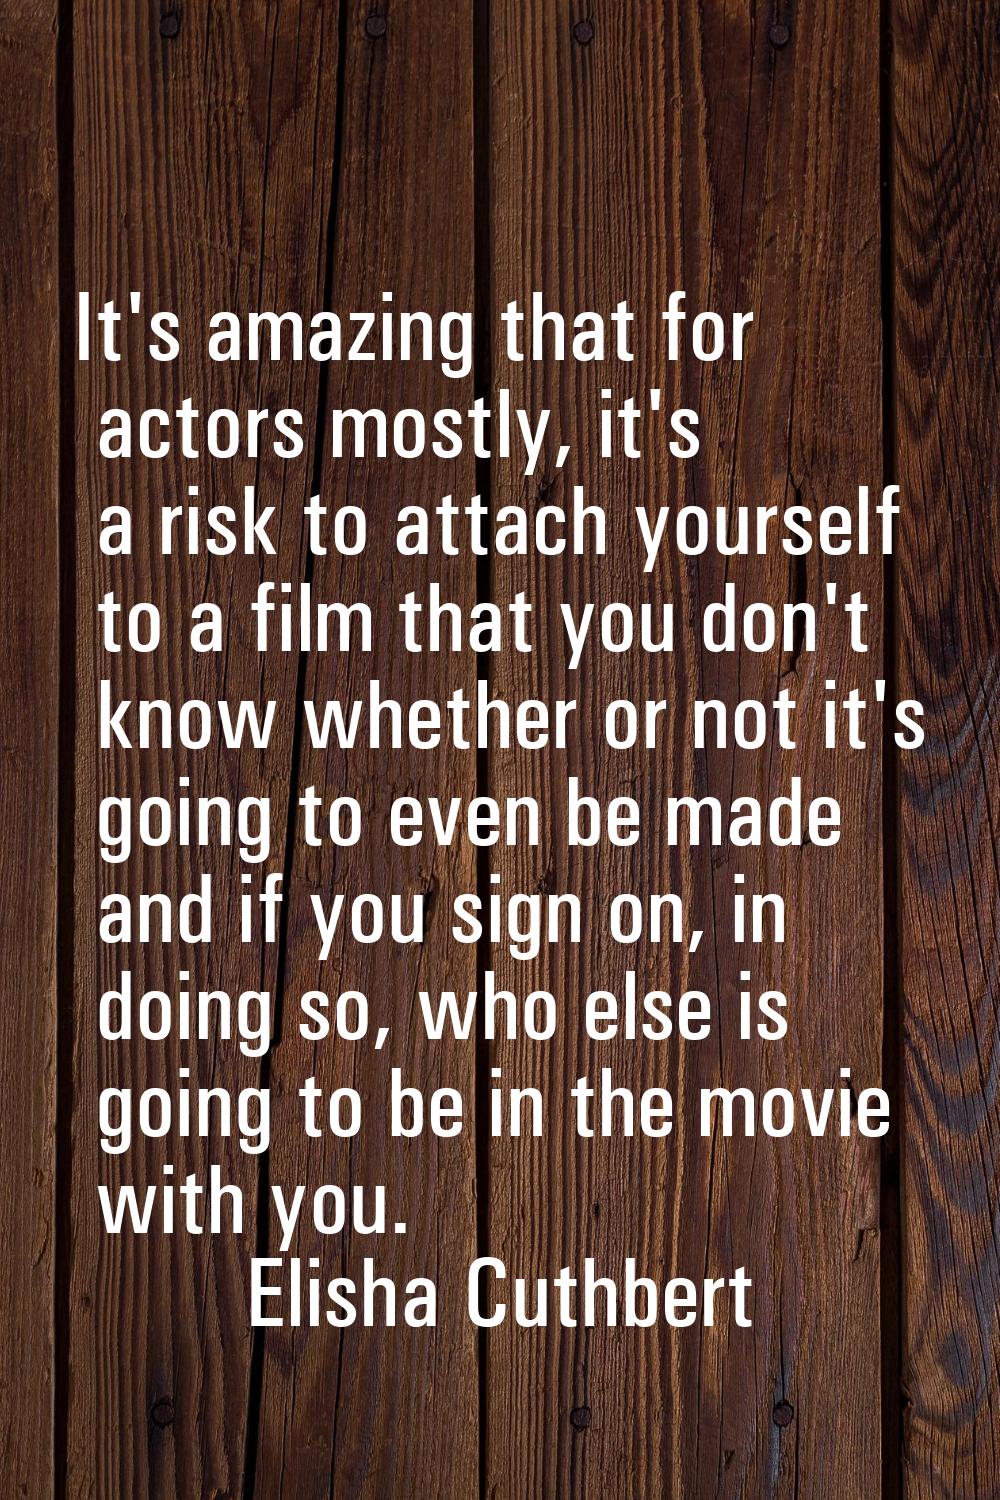 It's amazing that for actors mostly, it's a risk to attach yourself to a film that you don't know w